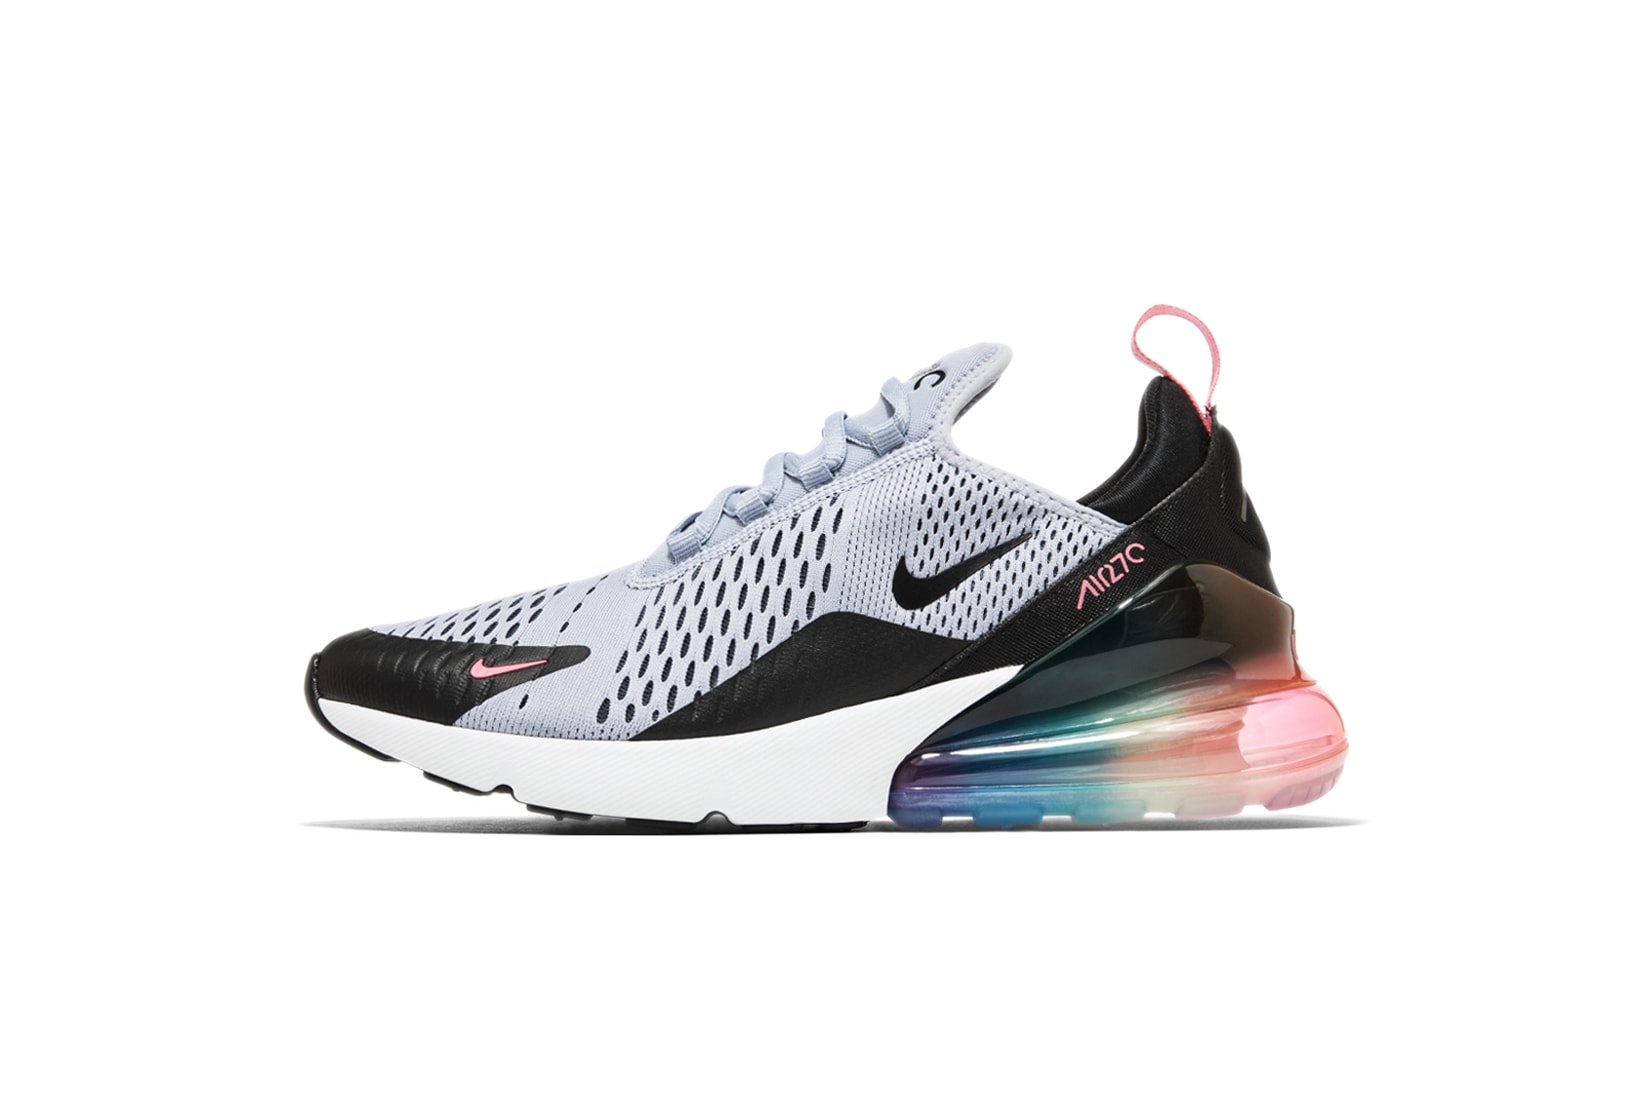 Nike BETRUE Be True LGBTQ 2018 Sneaker Collection VaporMax Plus Air Max 270 Epic React Flyknit Zoom Fly SP Lavender Pink Triangle Runners